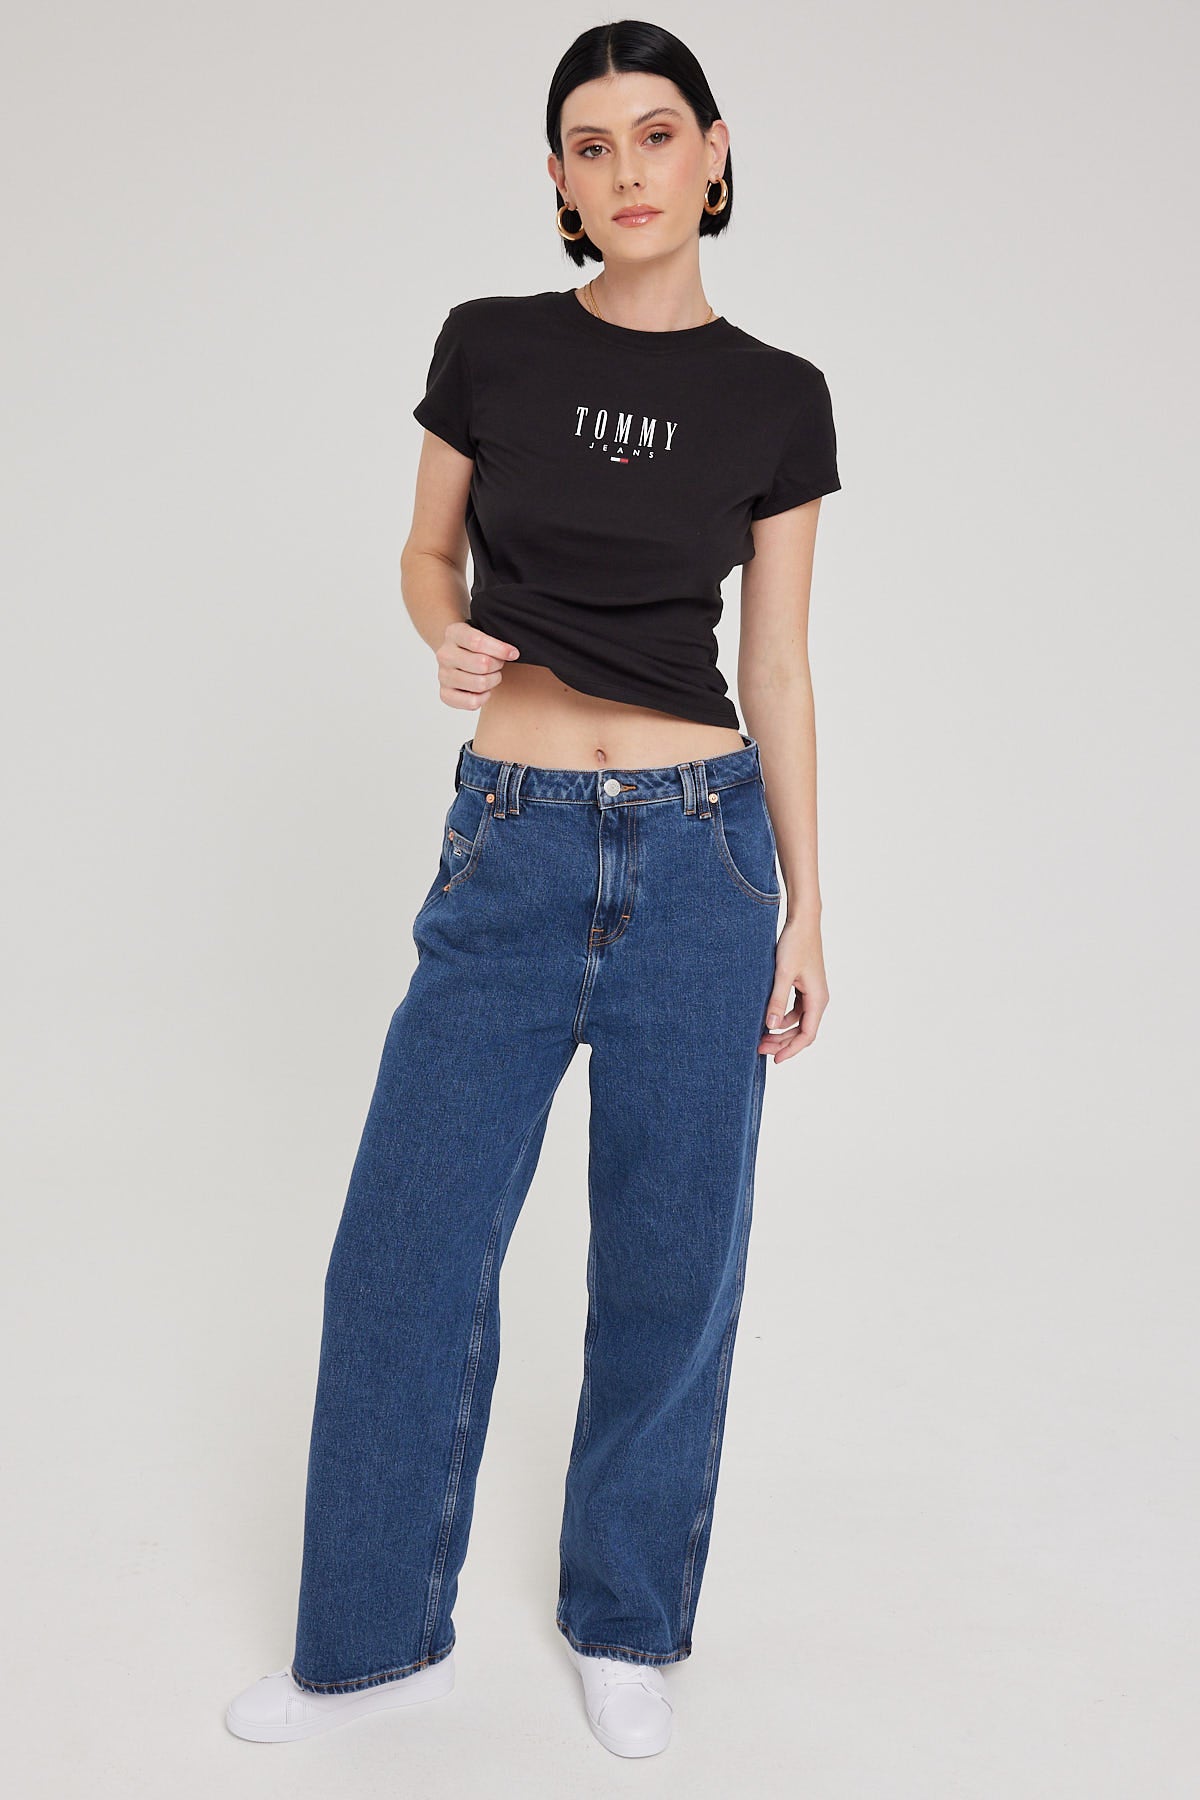 Tommy Jeans BABY ESSENTIAL LOGO 2 TEE BLACK